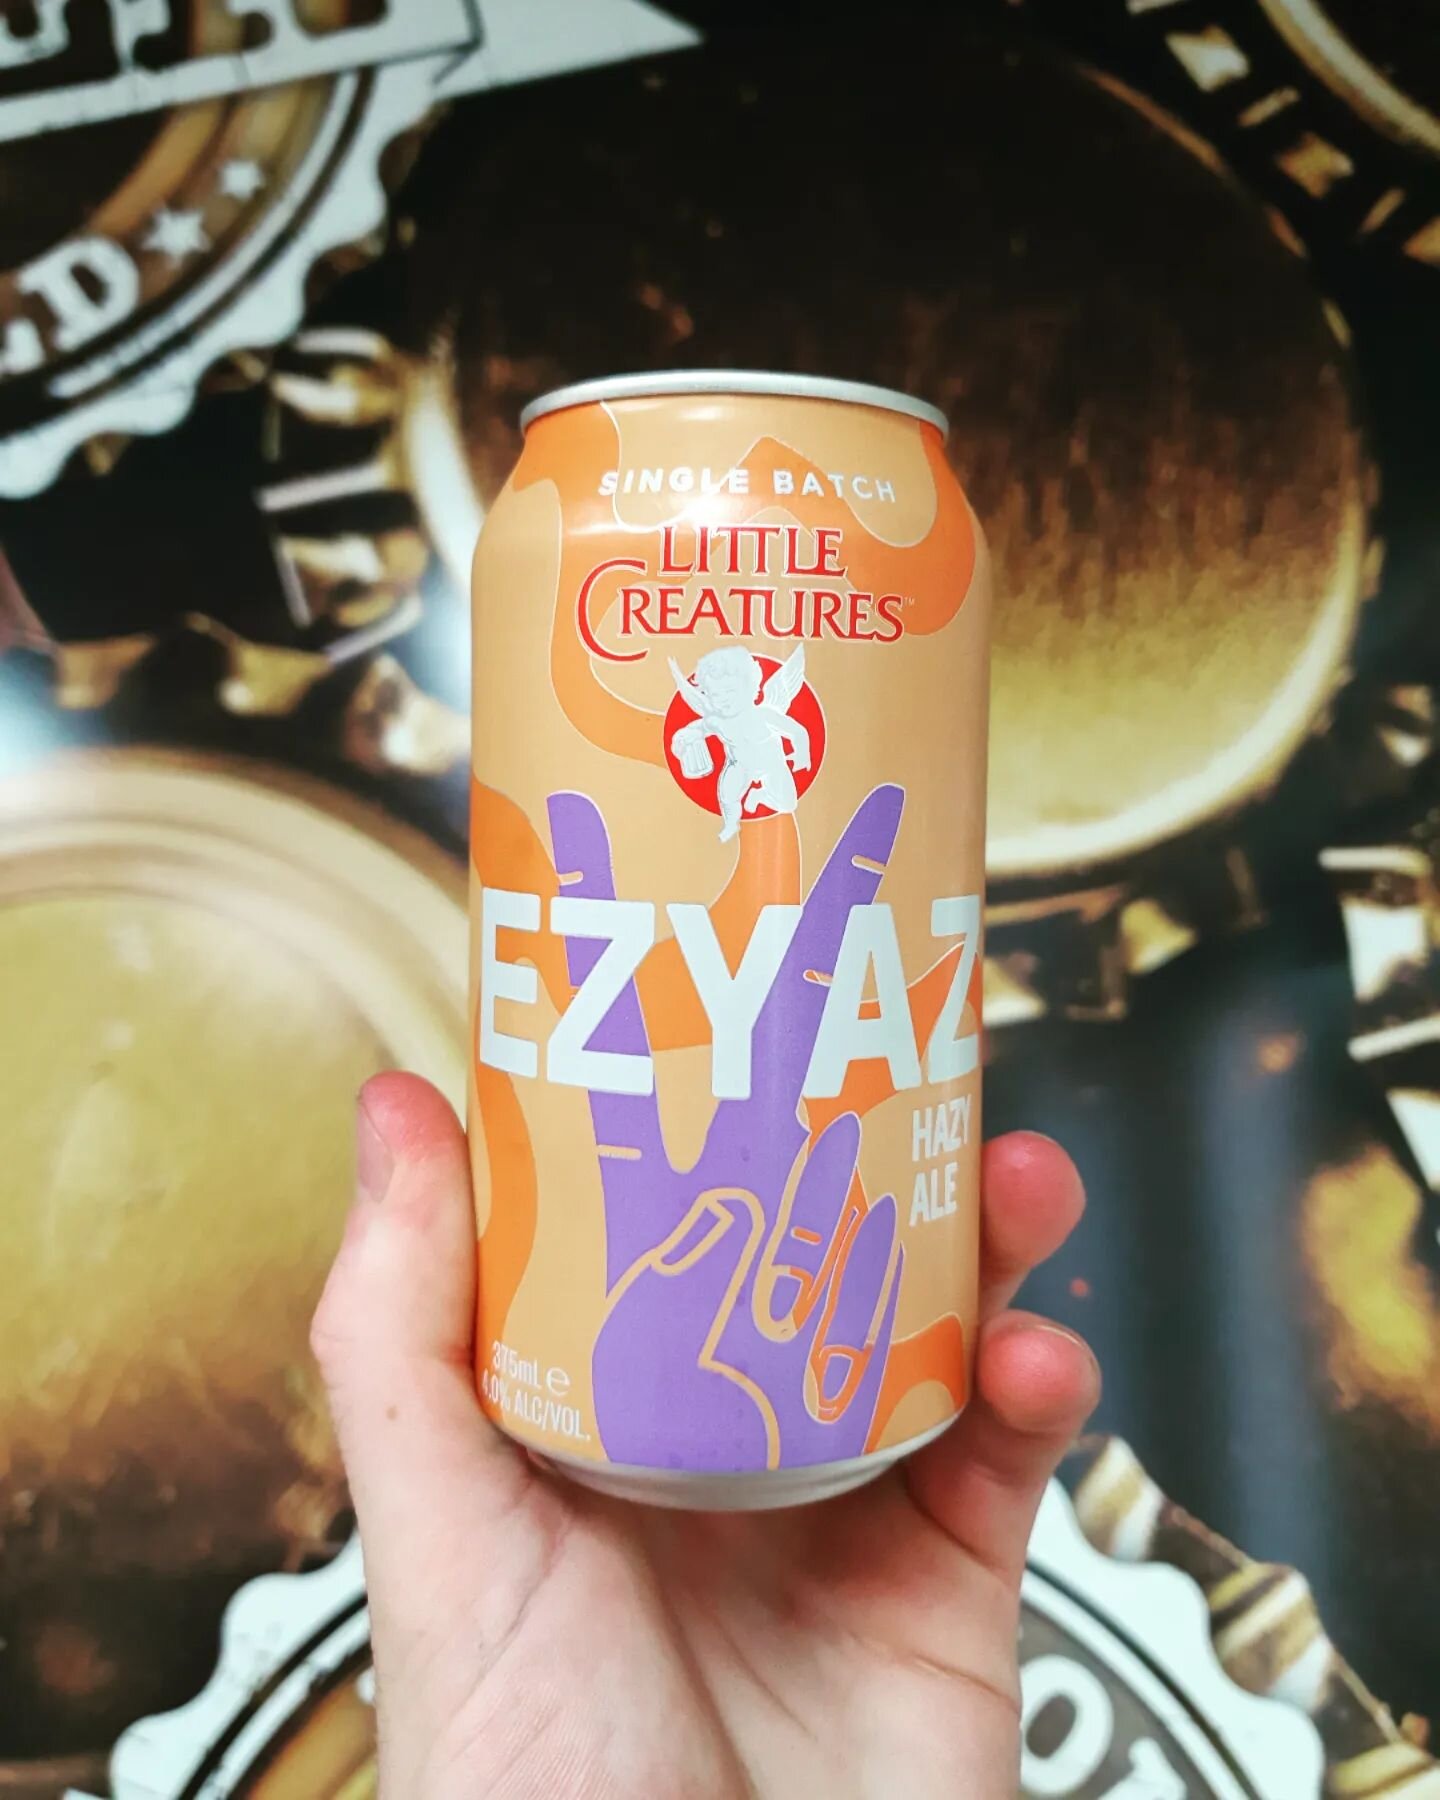 Looking for a tasty drop without the heaviness of an IPA? @littlecreaturesbrewing has you covered with their new release, Ezy Az. A vibrant hazy sitting at only 4% ABV. This tasty beer is light enough to enjoy a few and not be overwhelmed by the weig